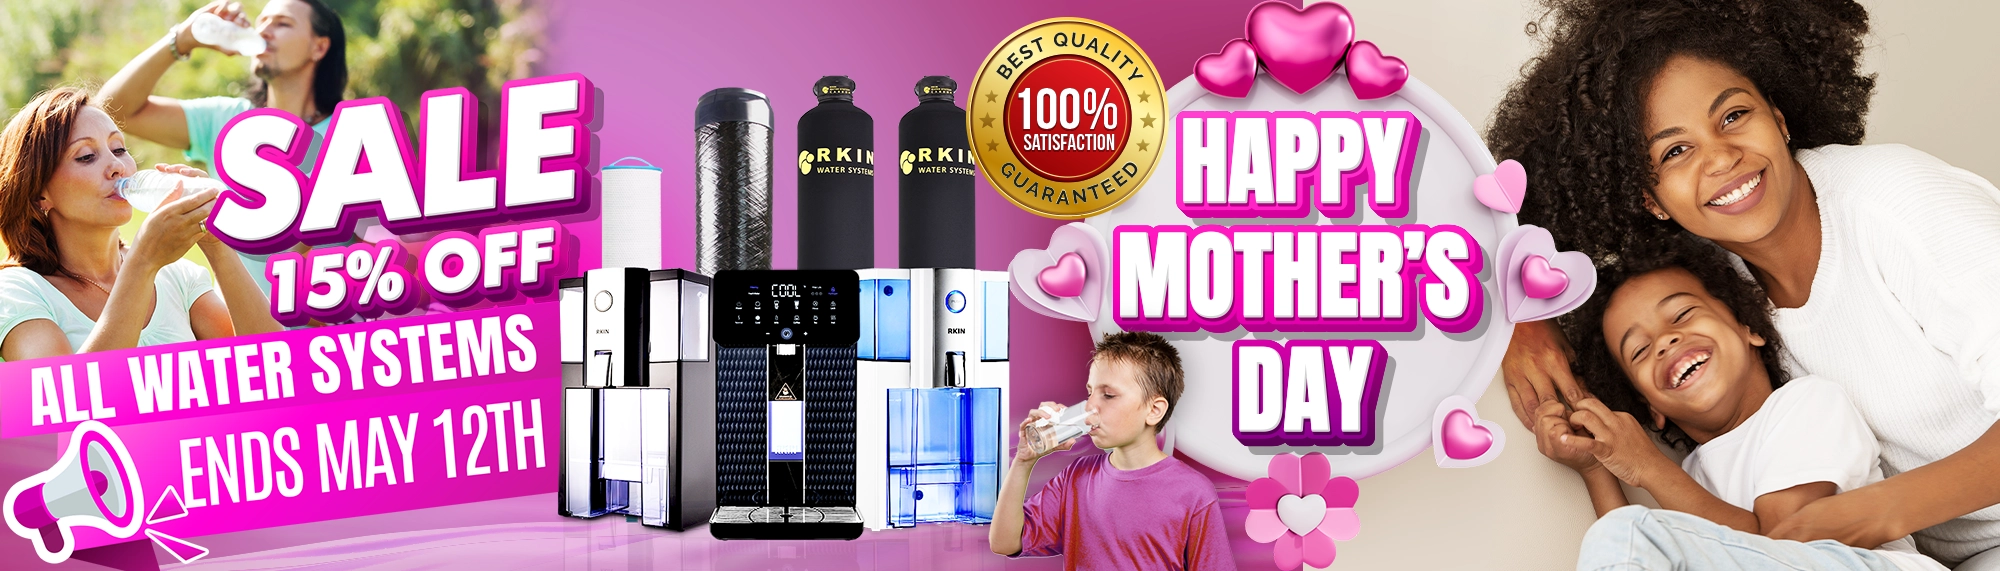 Mother's Day sale, Ends May 12th